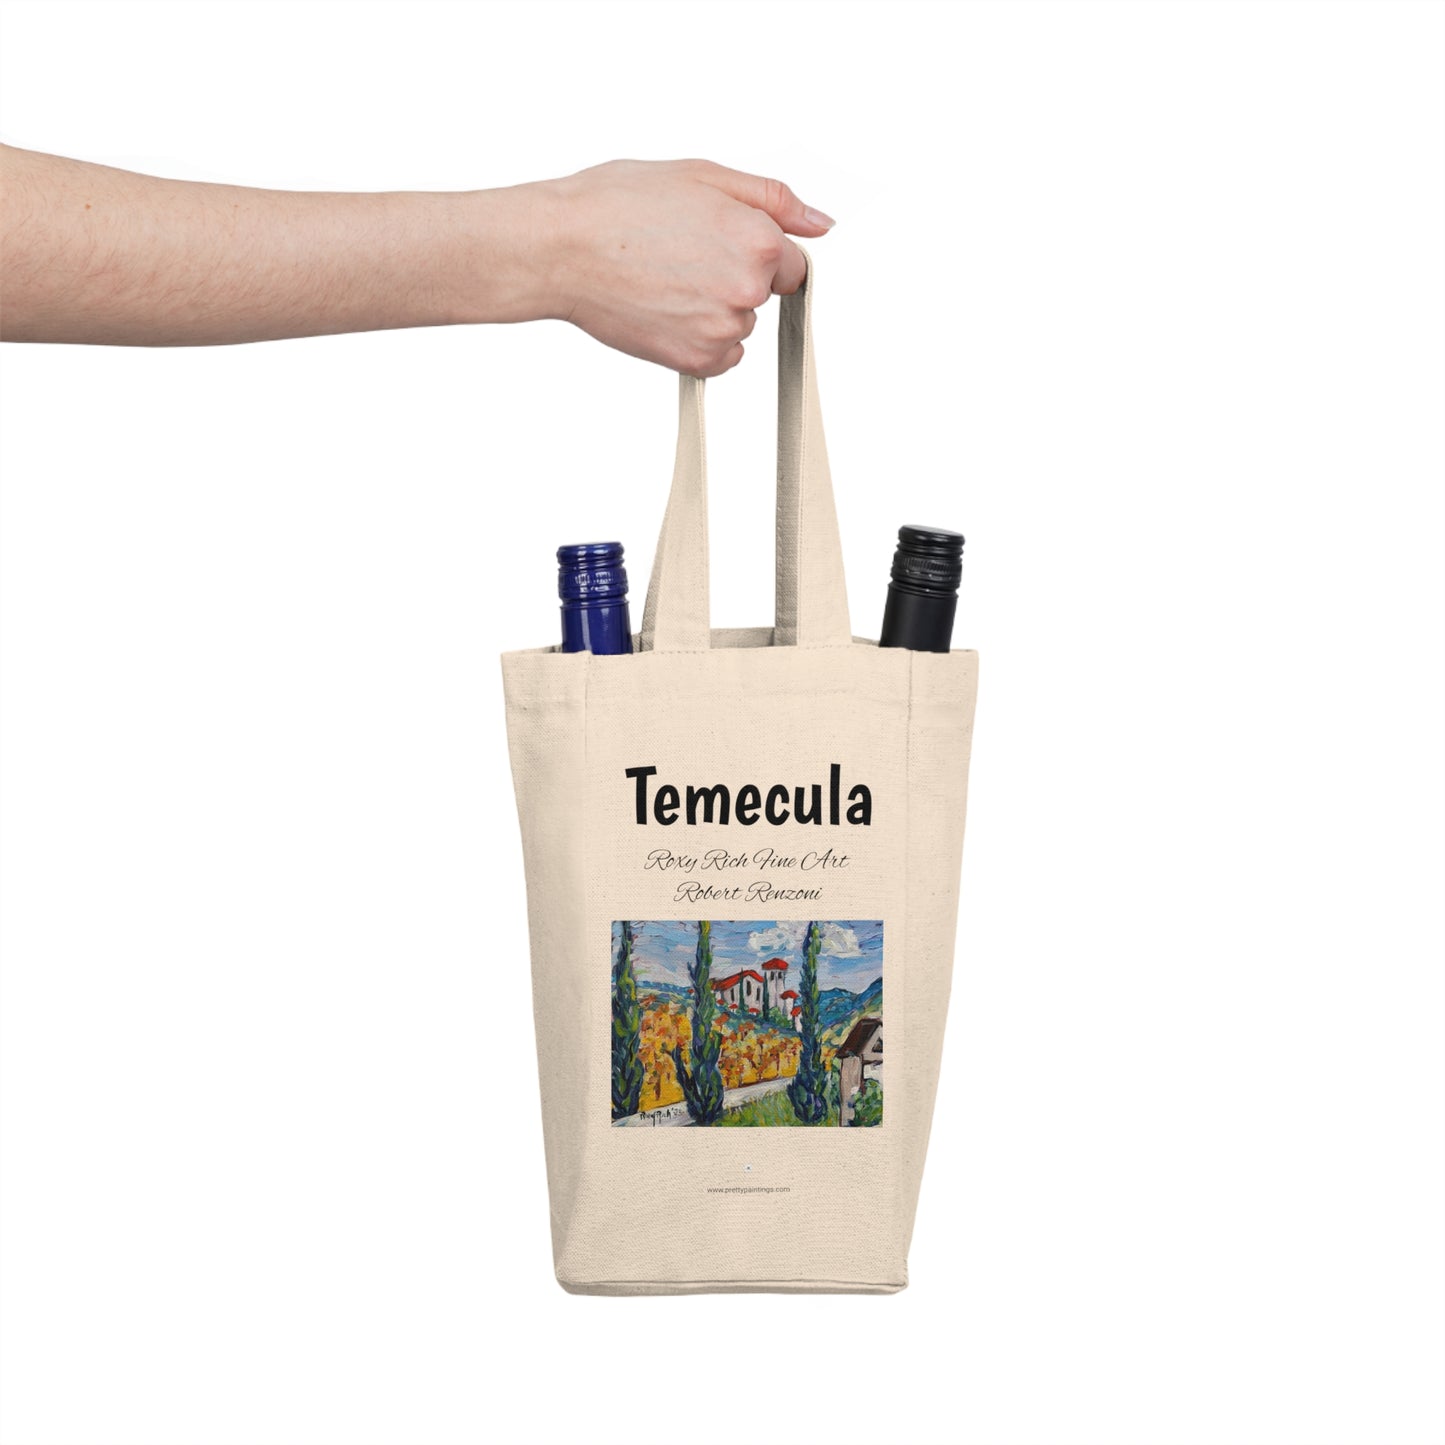 Temecula Double Wine Tote Bag featuring "Robert Renzoni" painting